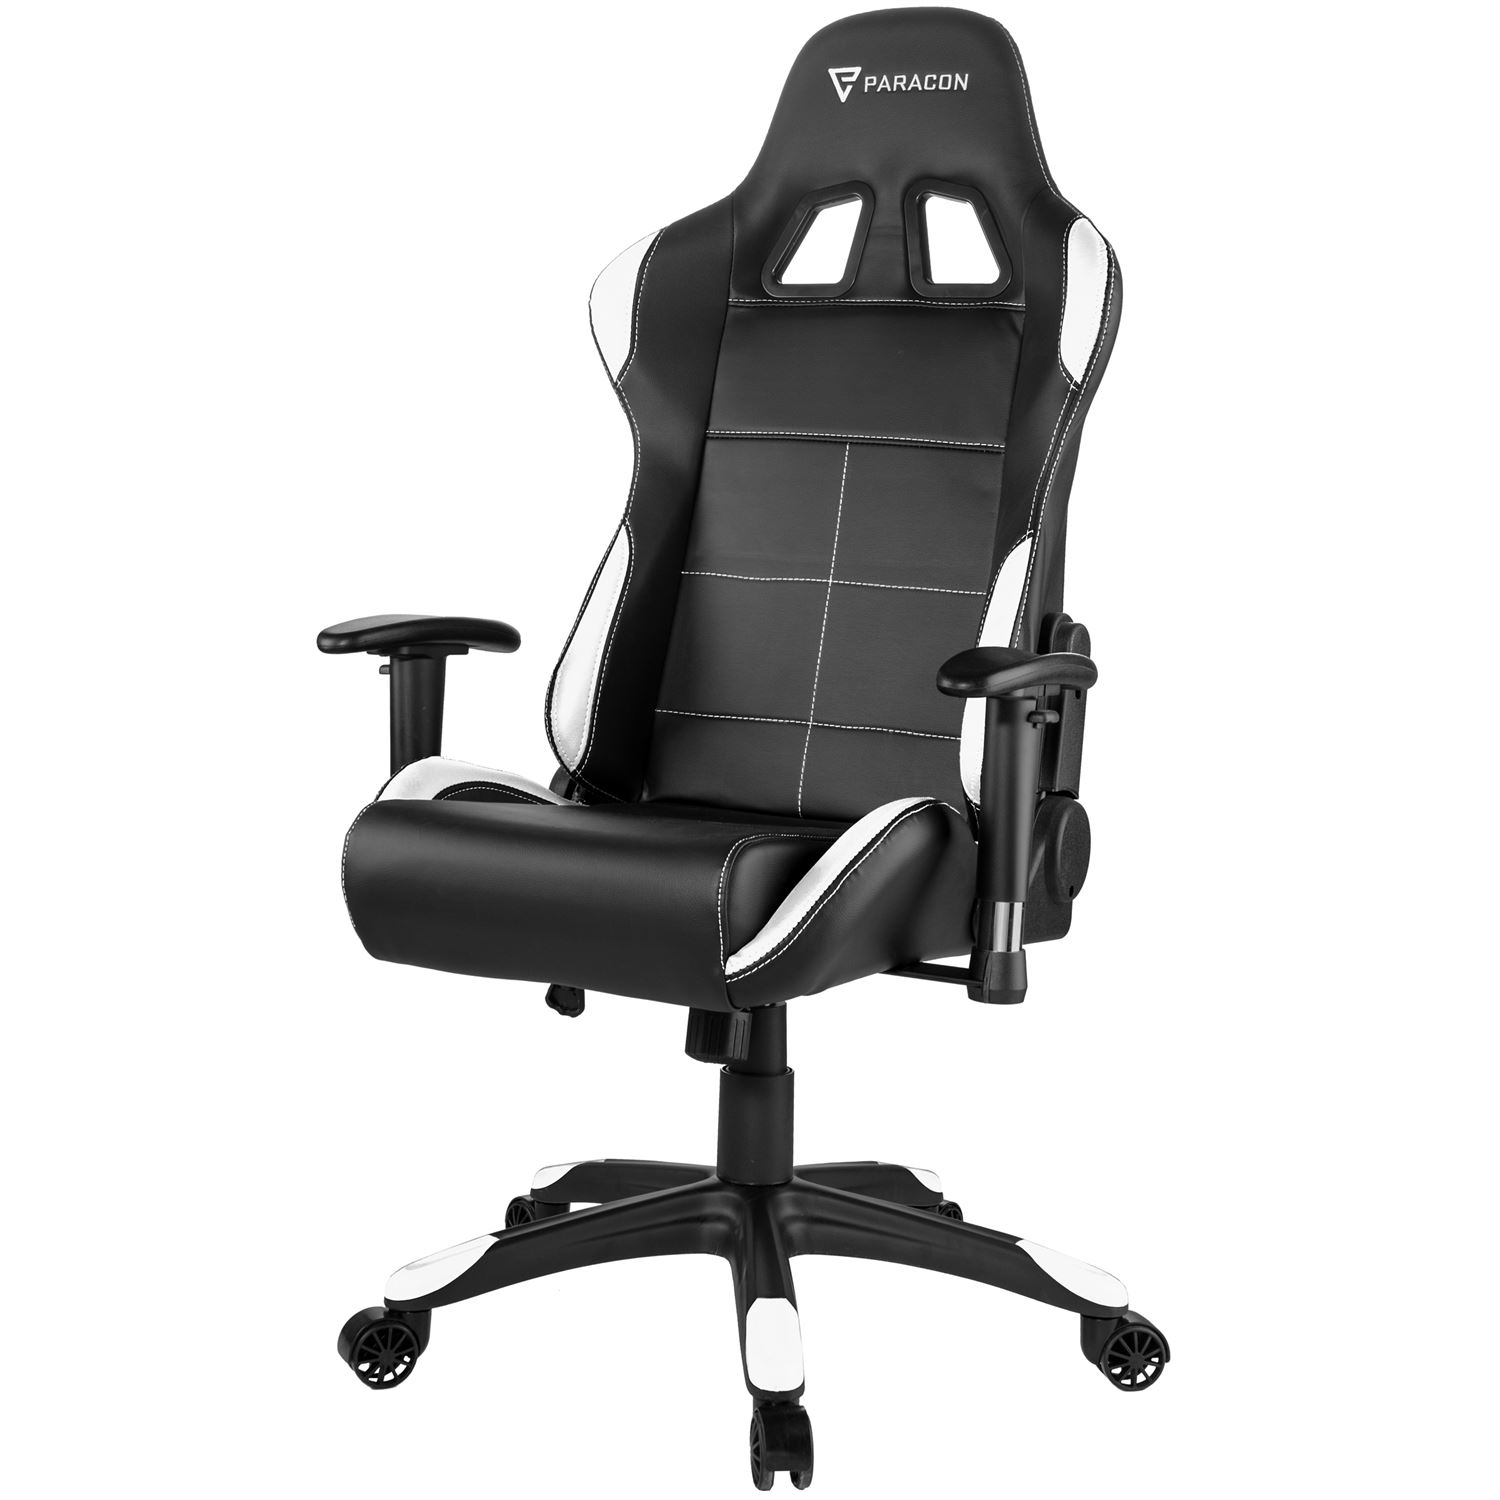 reservedele Insister nevø Paracon ROGUE Gaming Chair - White | Paracon